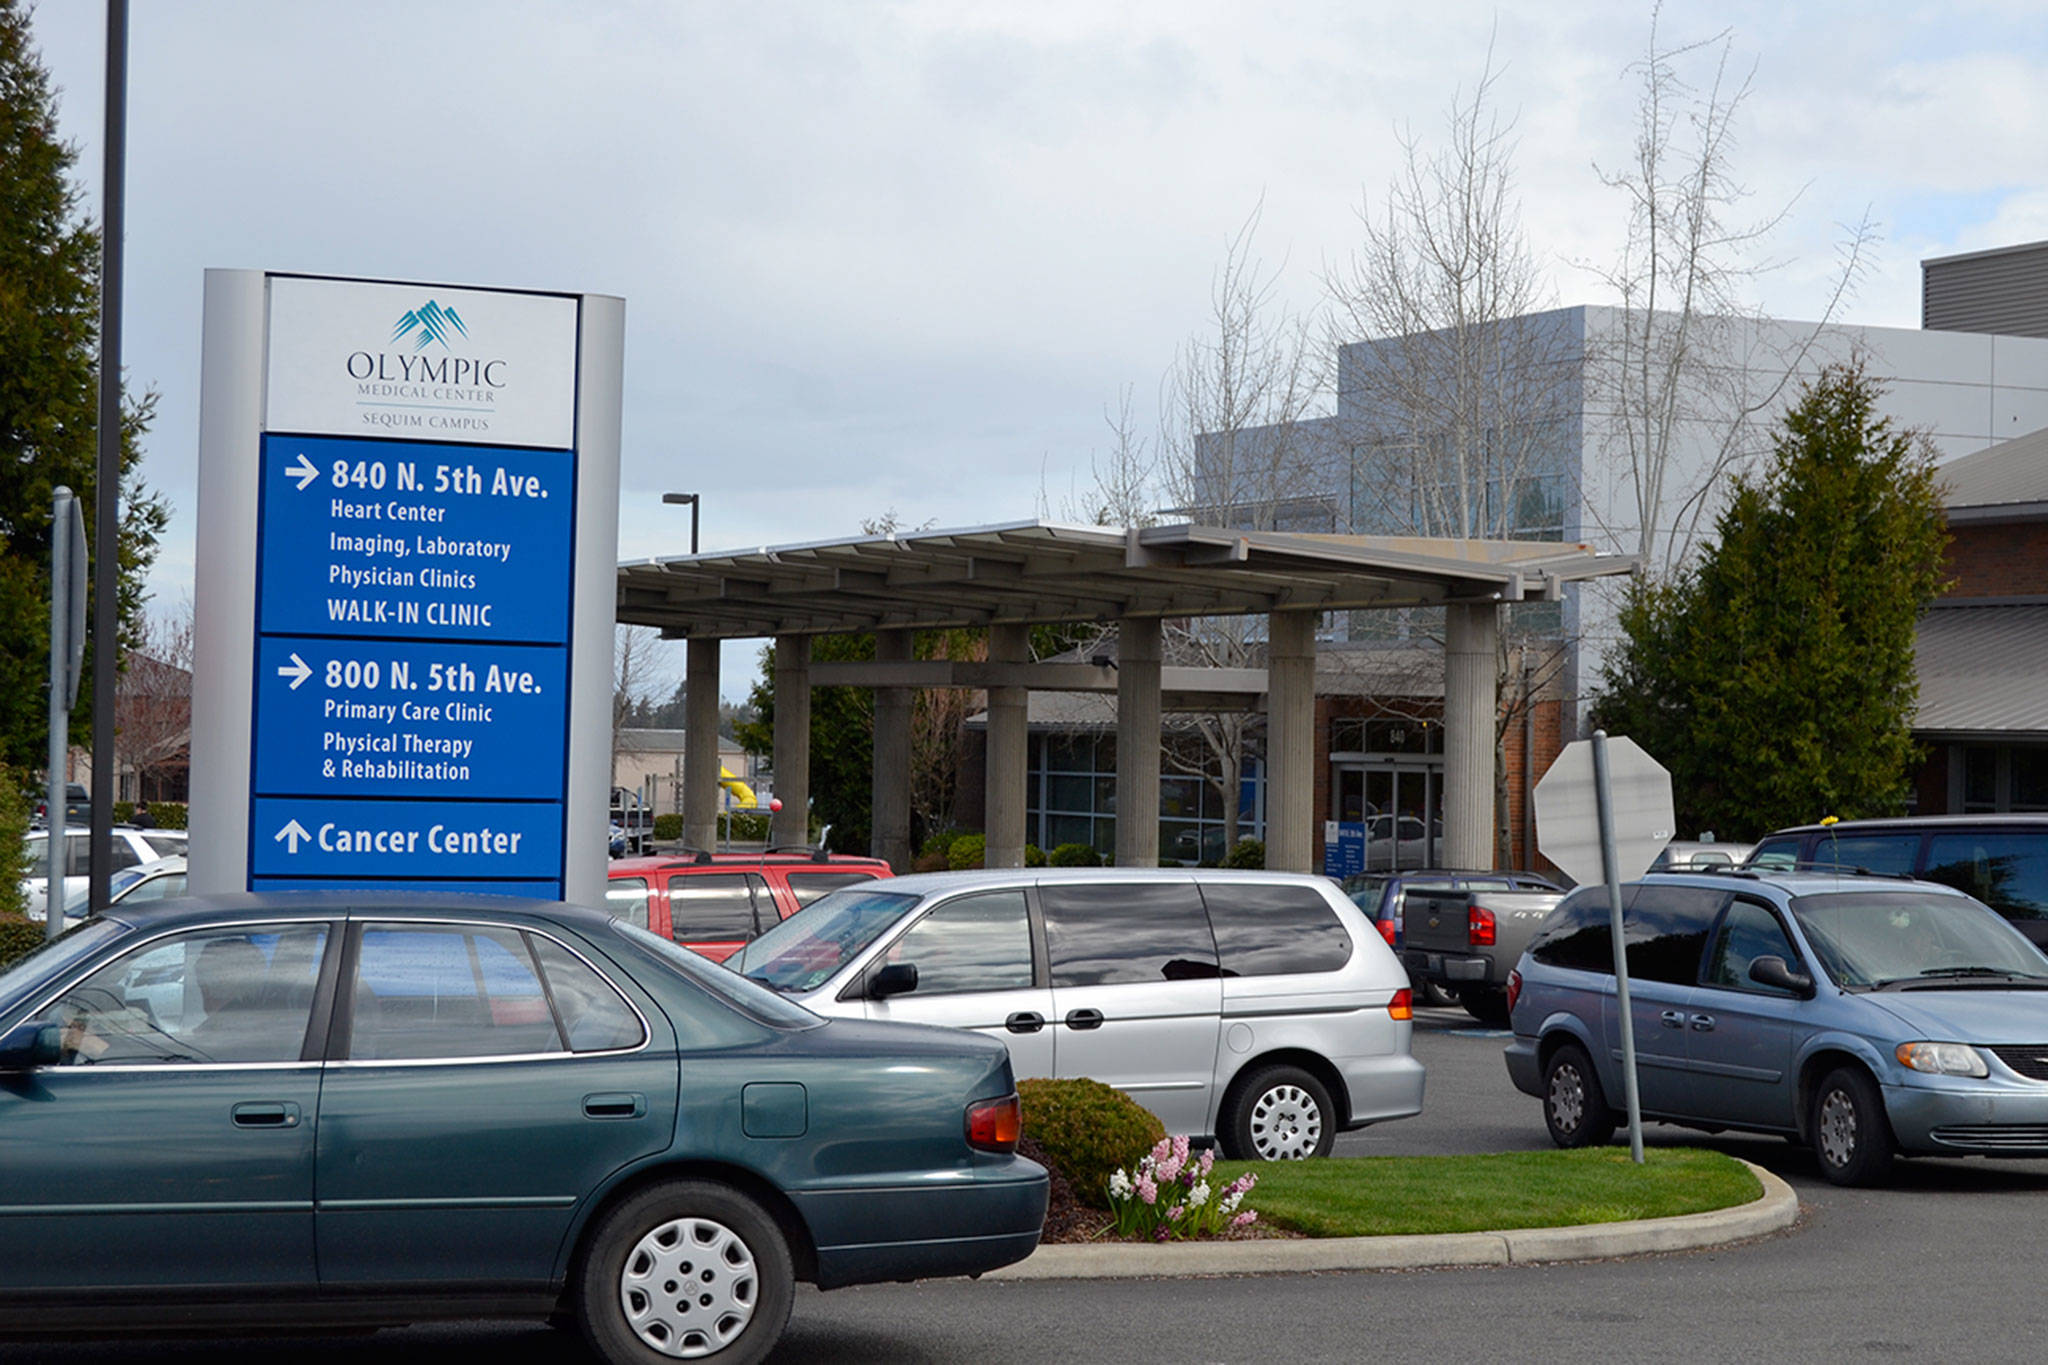 After approving joint resolutions to work together, Sequim city councilors and Clallam County Fire District 3 commissioners look to discuss options with medical agencies like Olympic Medical Center to bring an emergency medical center to Sequim. Sequim Gazette photo by Matthew Nash